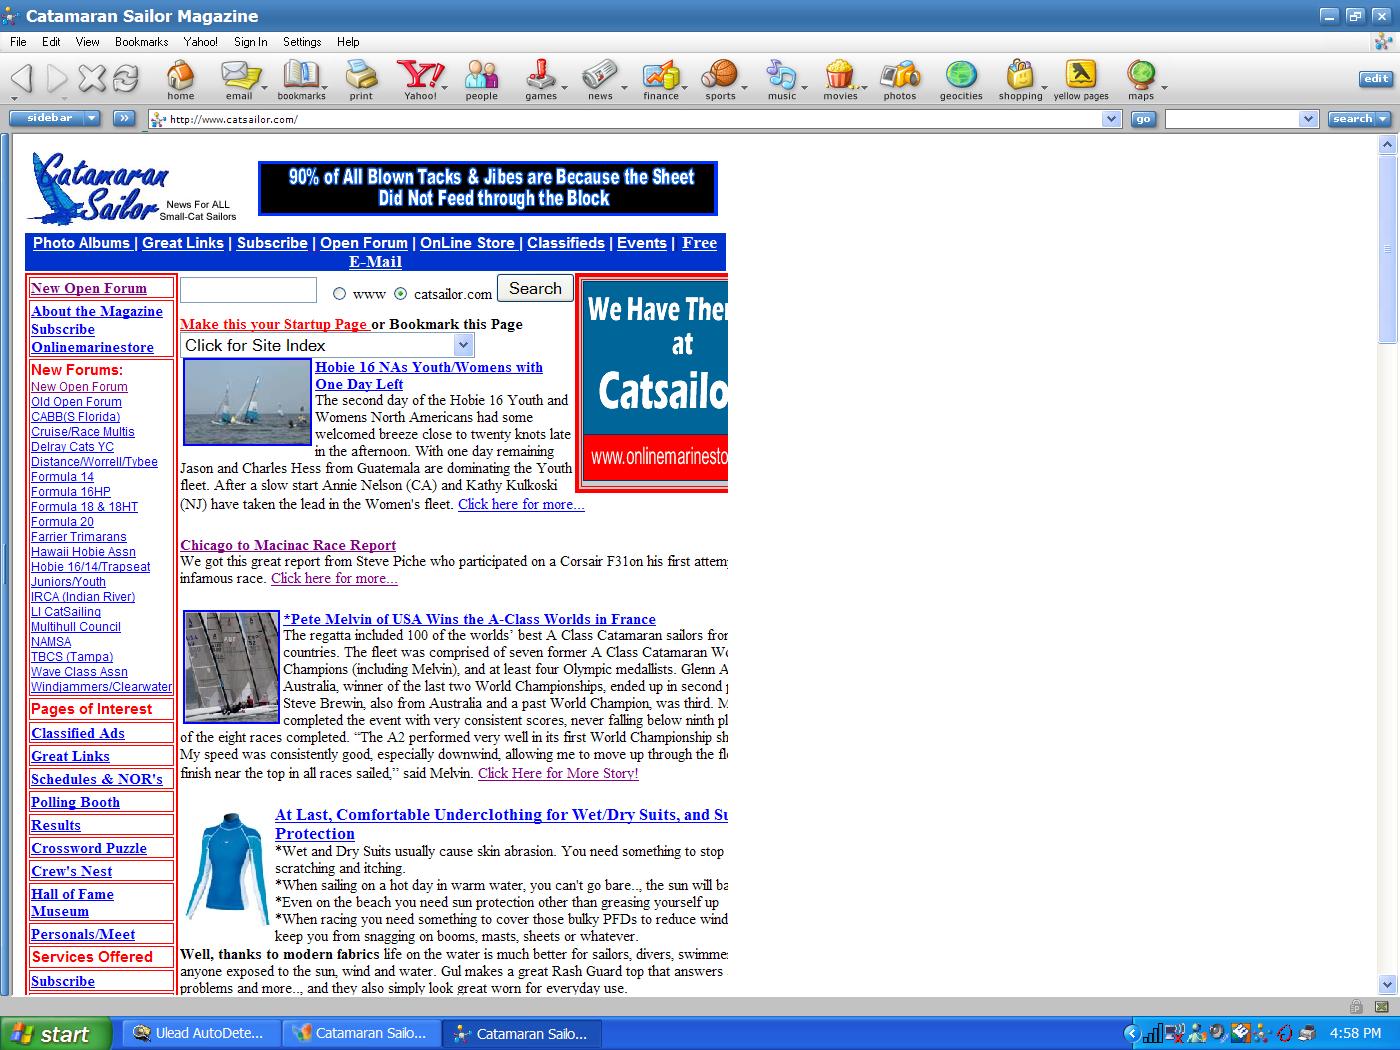 Attached picture 54233-Yahoo Browser Catamaran Sailor Main Page Paint 7-24-05.JPG